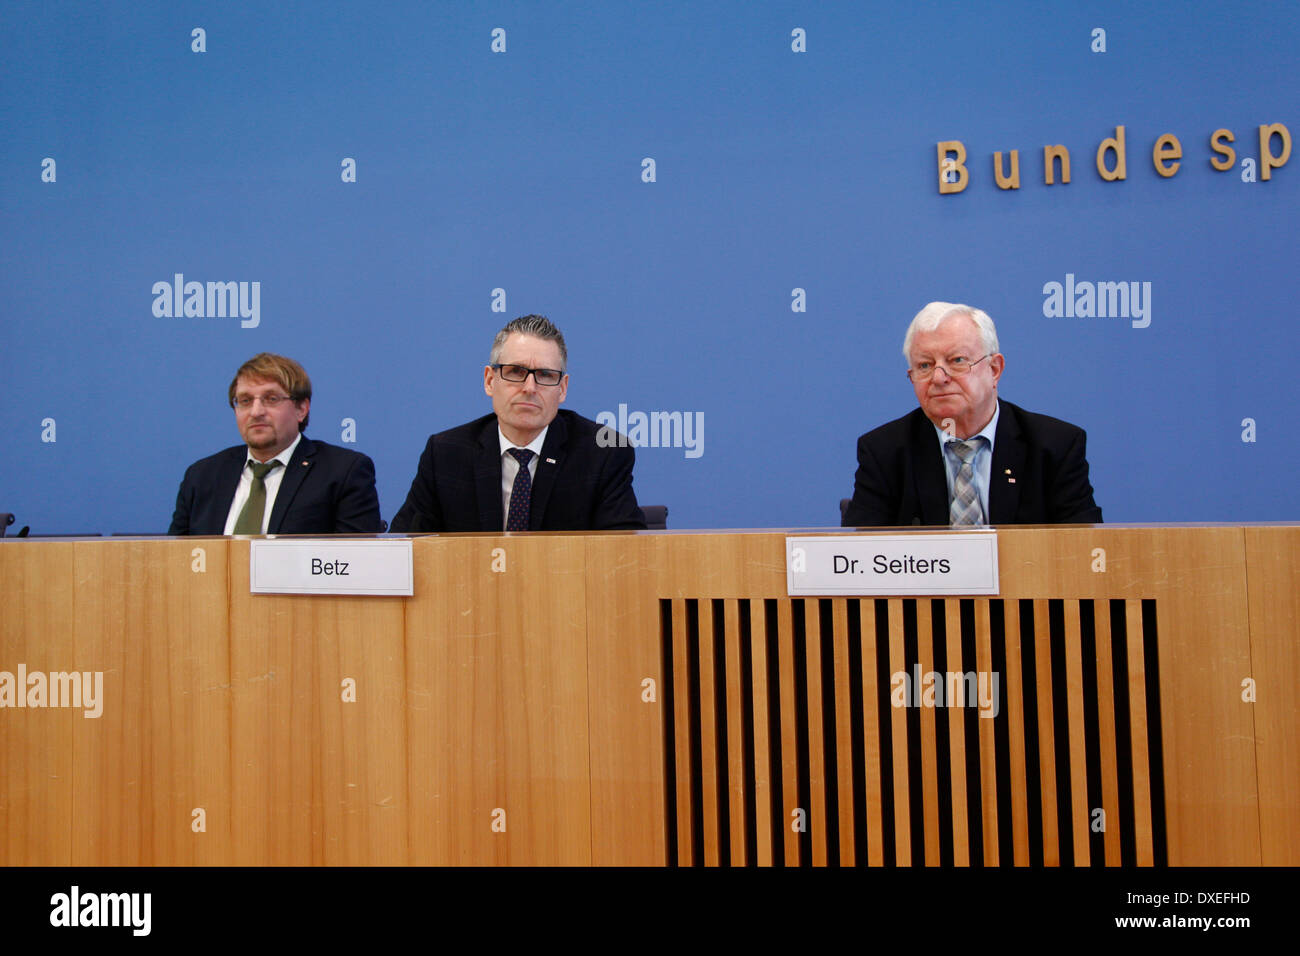 Berlin, Germany. March 25th, 2014. Press conference with president of German Red Cross, Seiters, team leader public welfare and social engagement of the German Red Cross, Betz, and the consultant, Bibisidis on the subject '50 years voluntary social year.  Picture: (r to l) Dr. Rudolf Seiters, president of the German Red Cross, and Matthias Betz, team leader public welfare and social engagement of the German Red Cross, and Thomas Bibisidis, consultant of the German Red Cross. Stock Photo